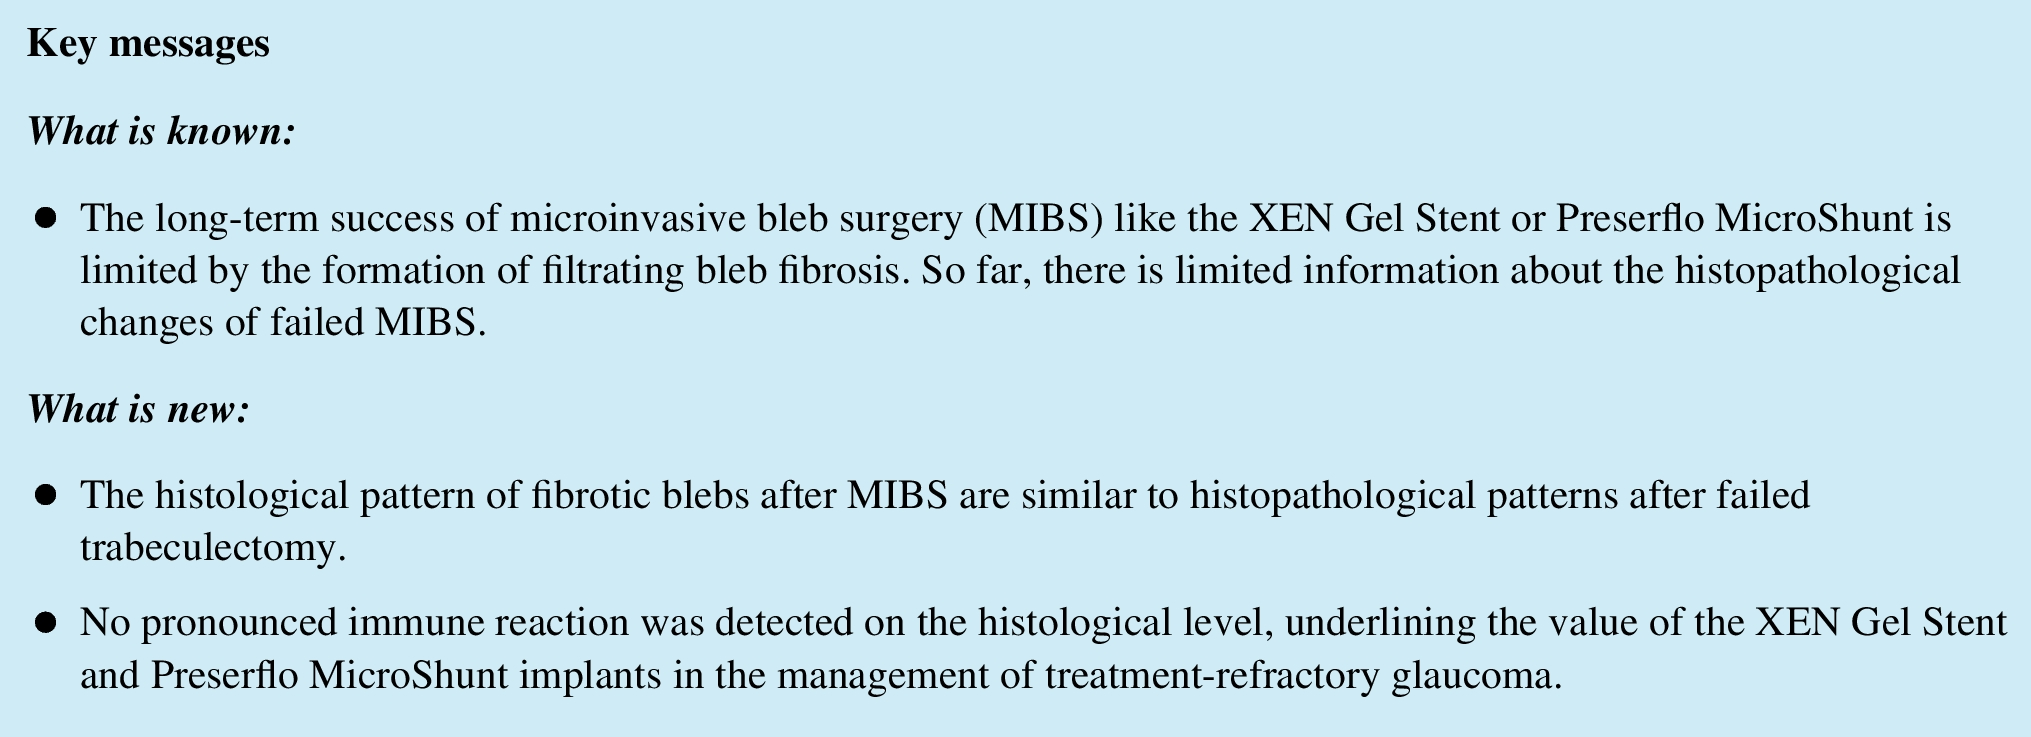 Histopathological findings of failed blebs after microinvasive bleb surgery with the XEN Gel Stent and Preserflo MicroShunt